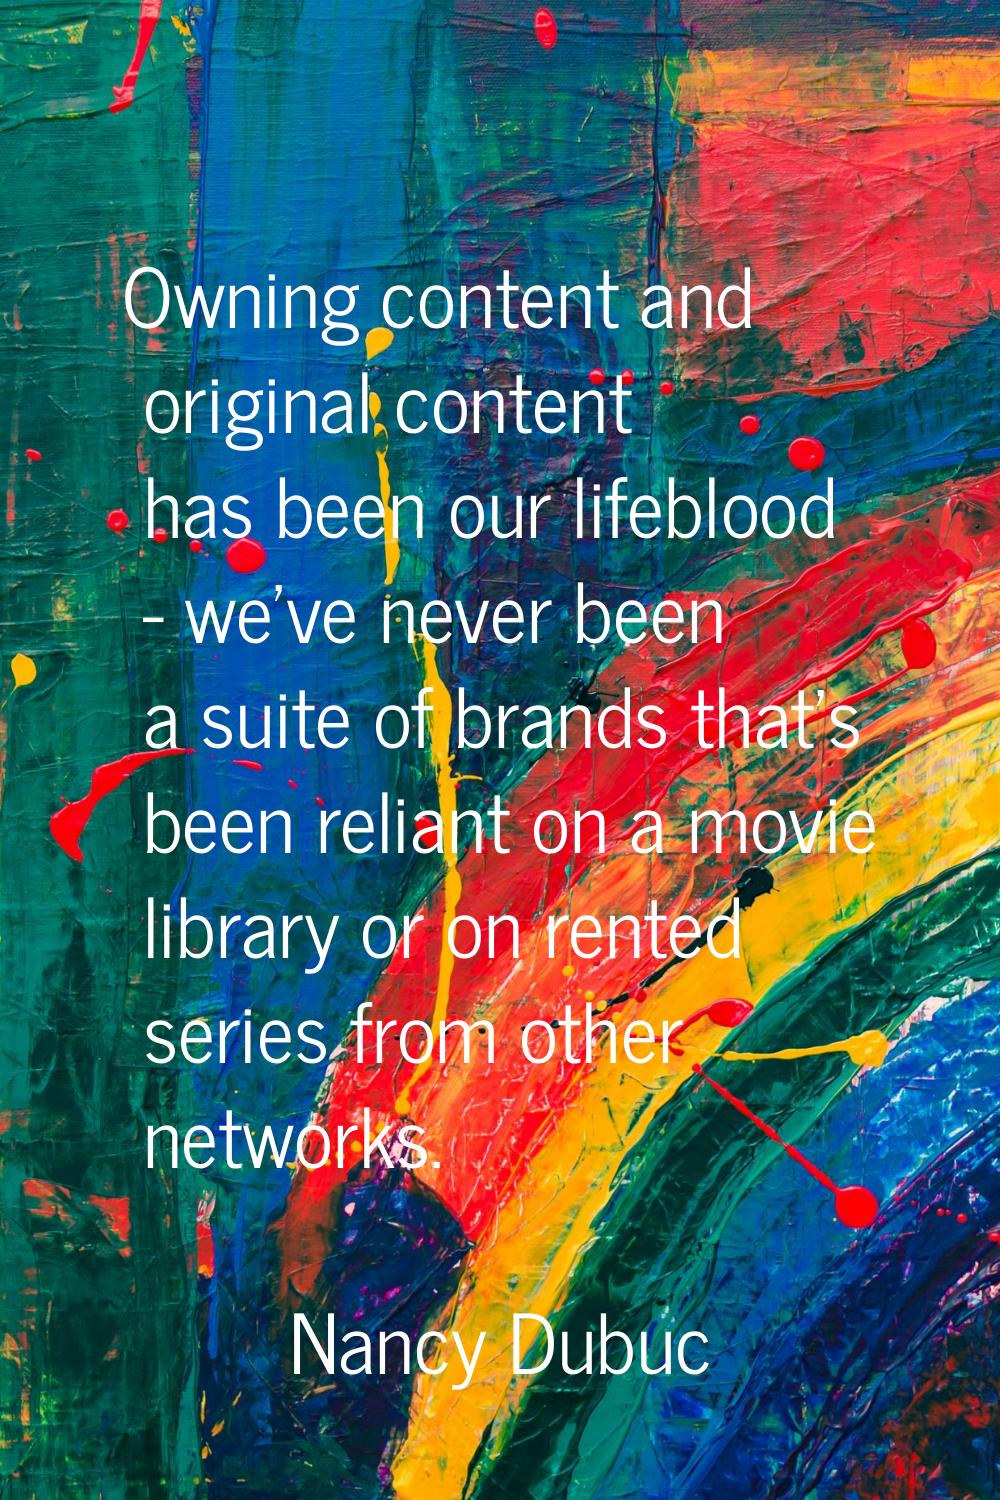 Owning content and original content has been our lifeblood - we've never been a suite of brands tha